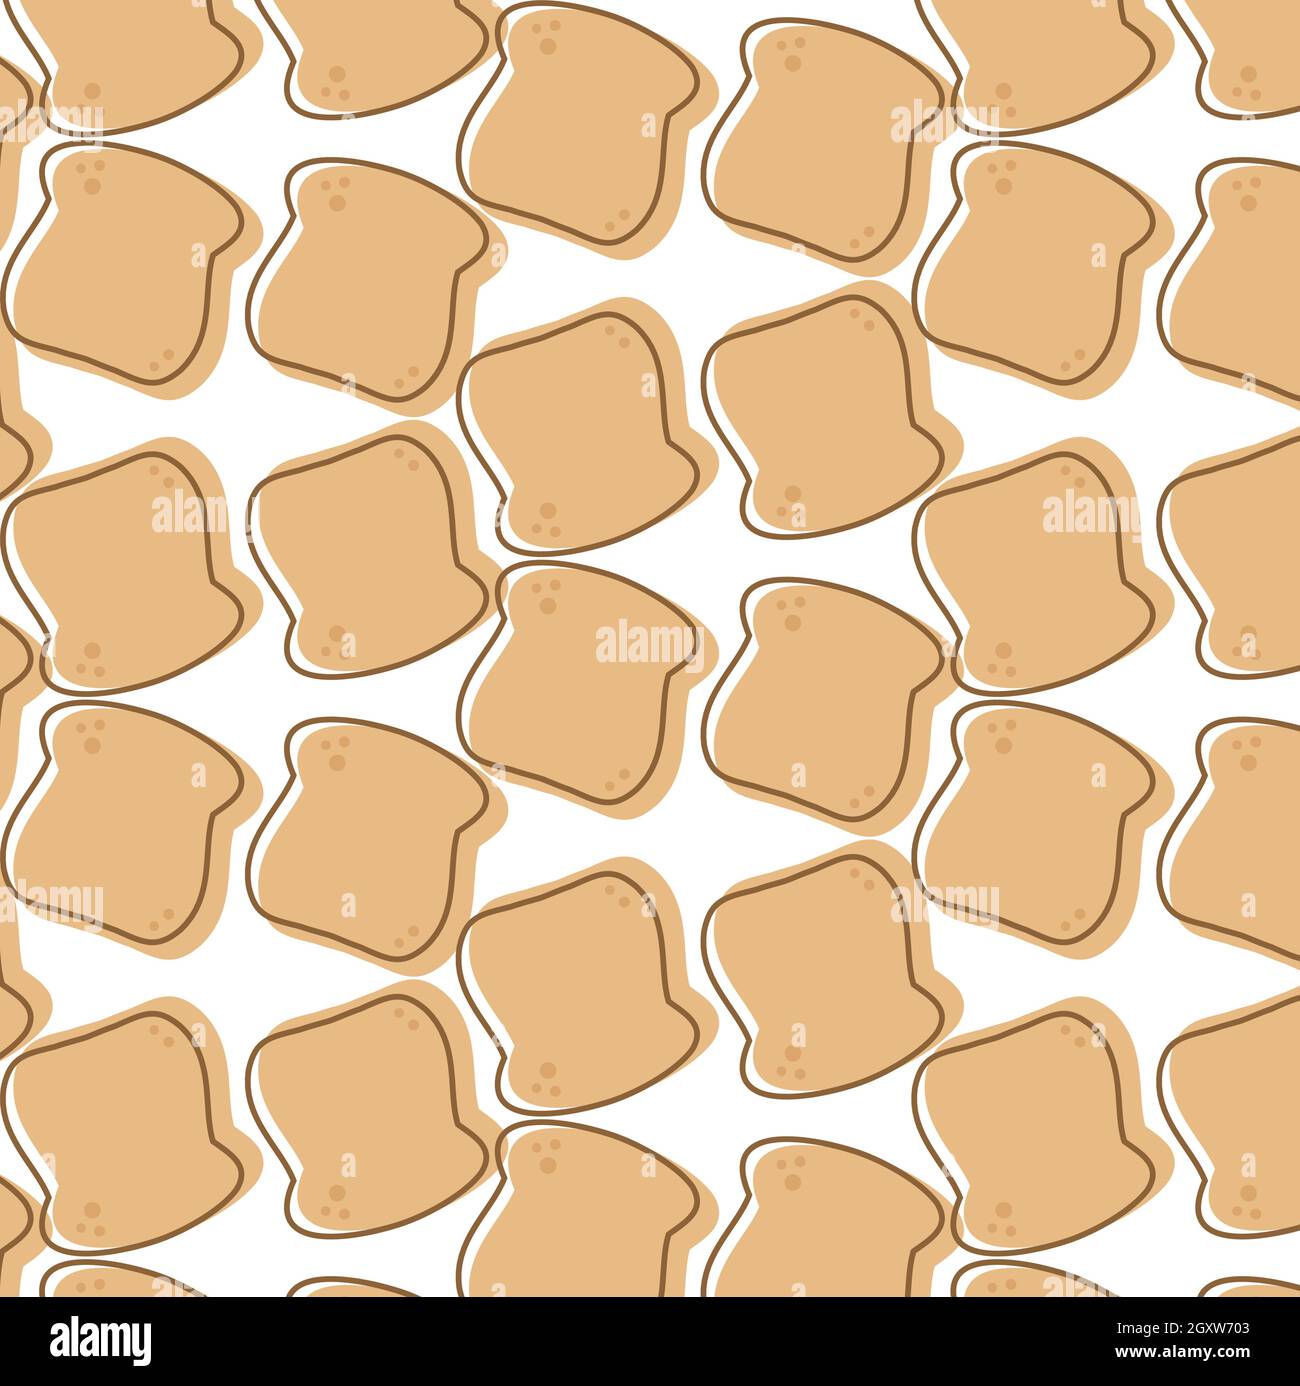 Seamless toast slice vector illustration on a white background. Stock Vector